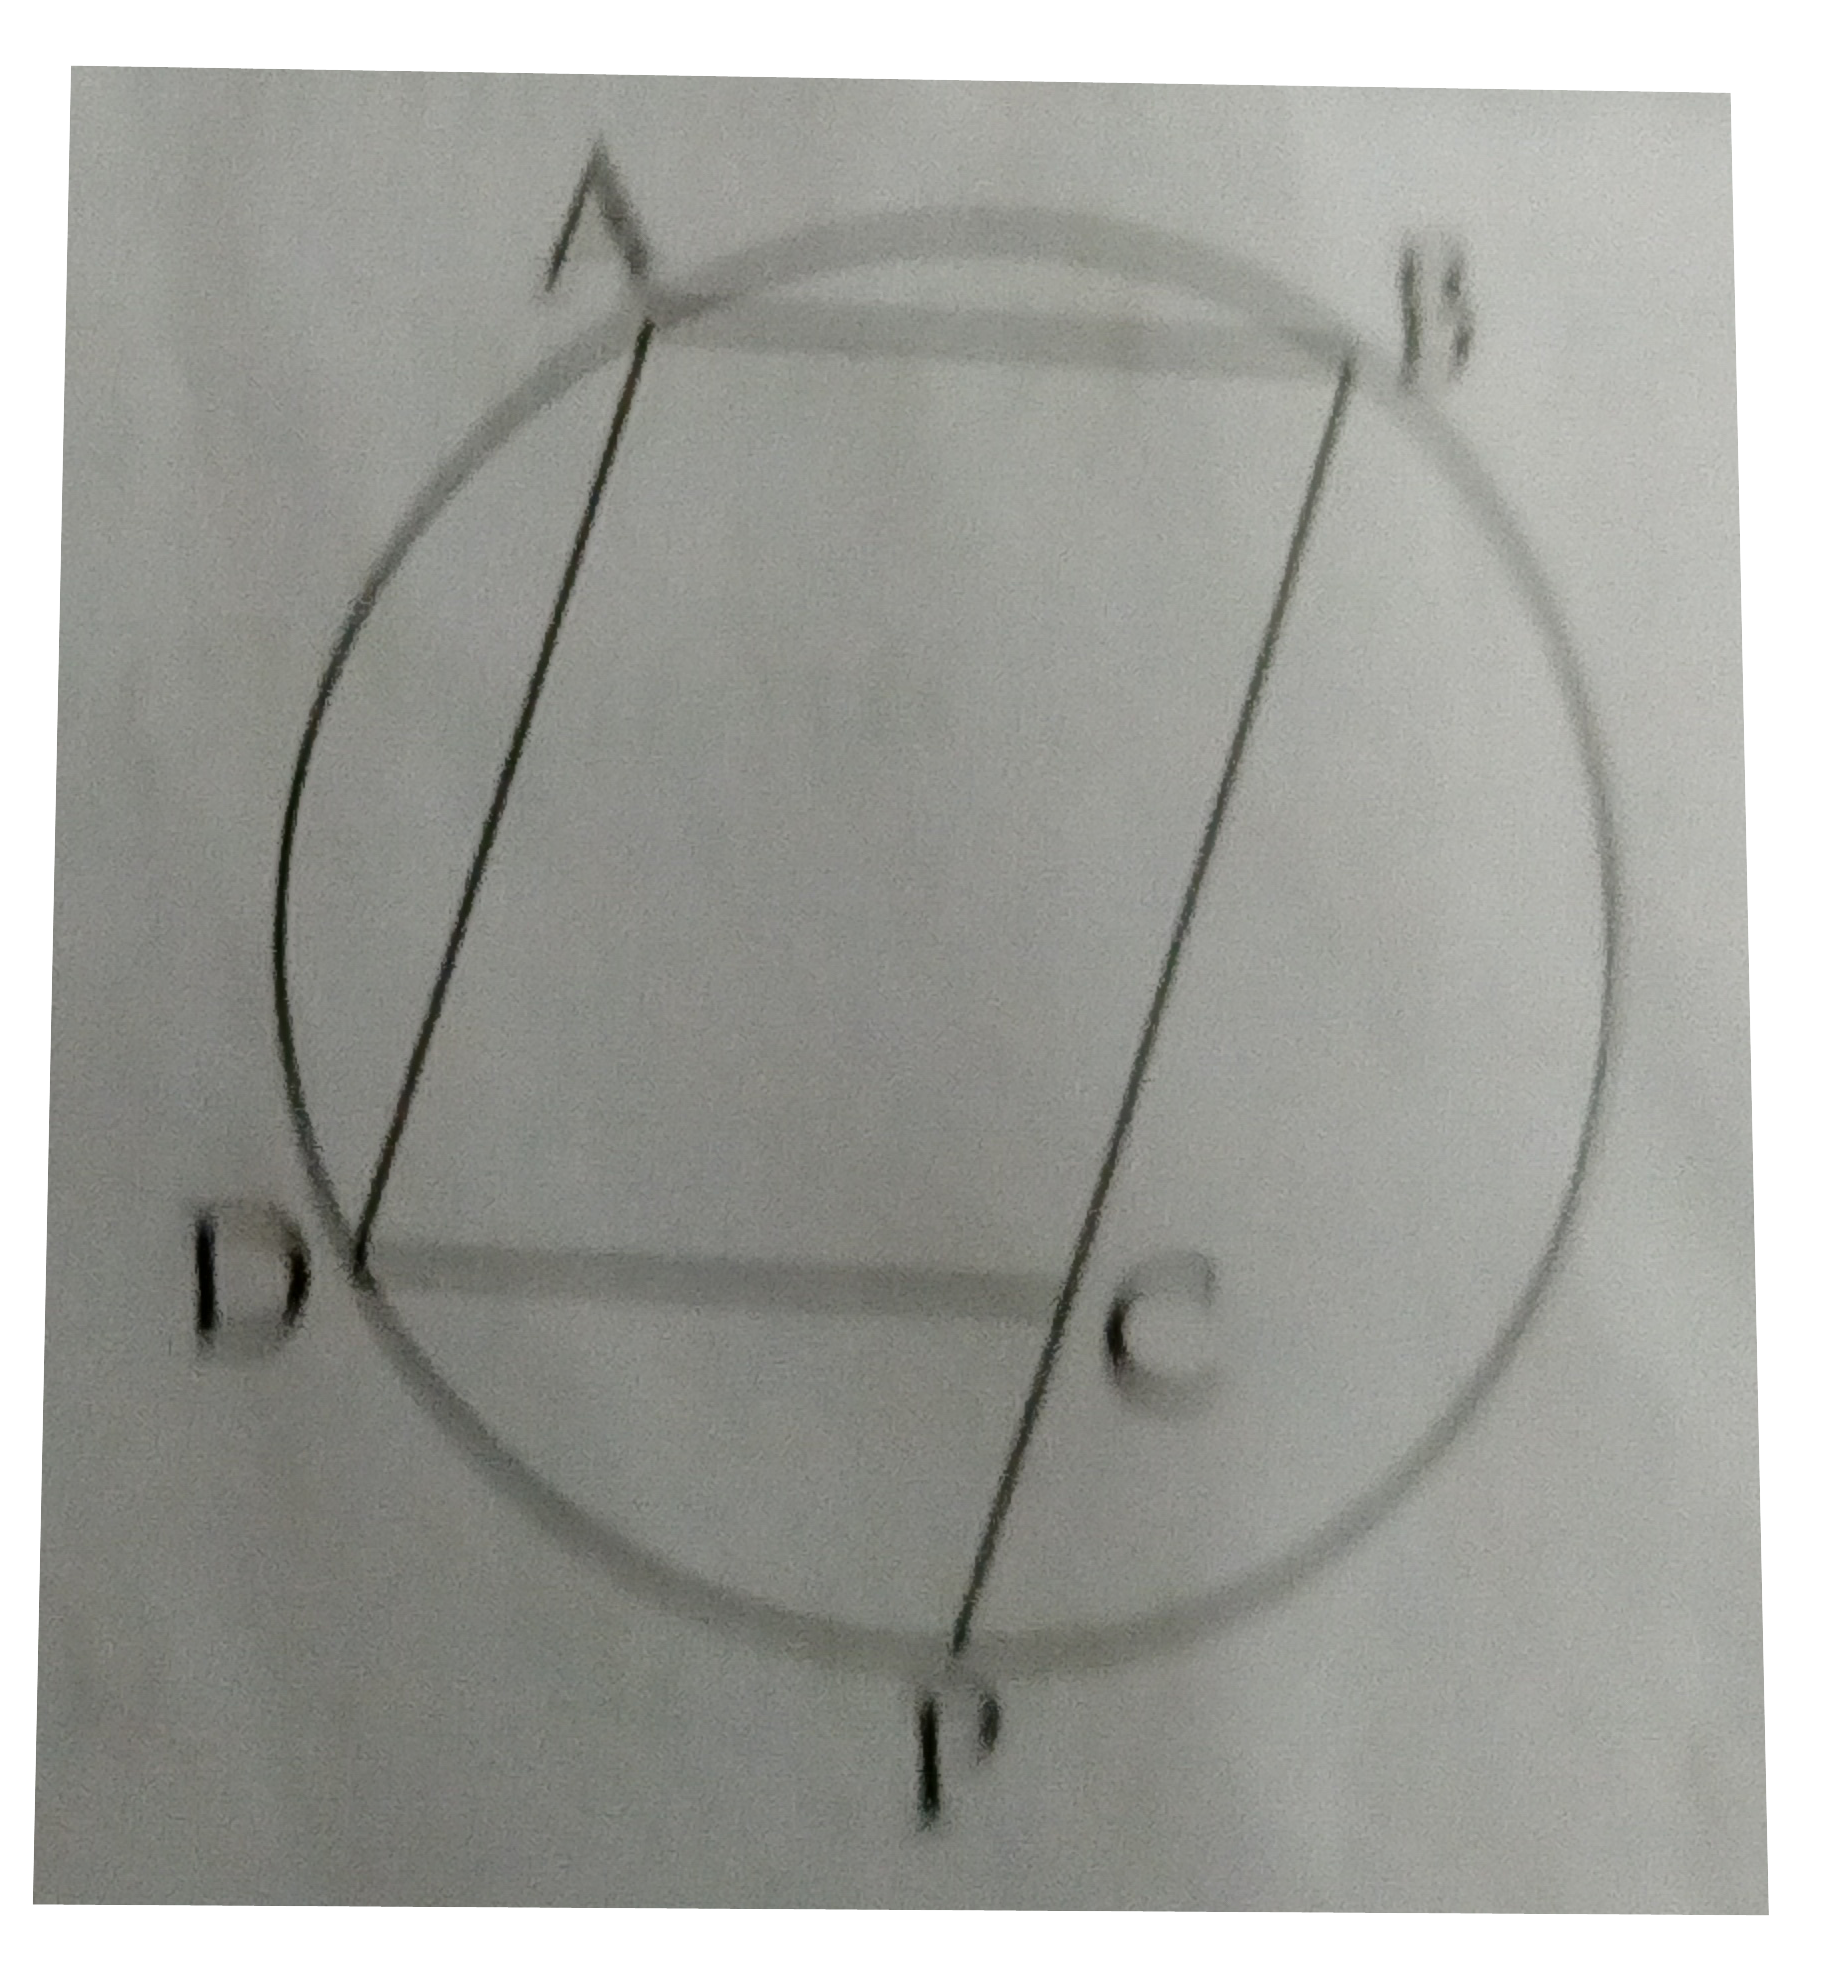 squareABCD  is a parallelogram . Side BC  intersects circle at point P . Prove that DC = DP .